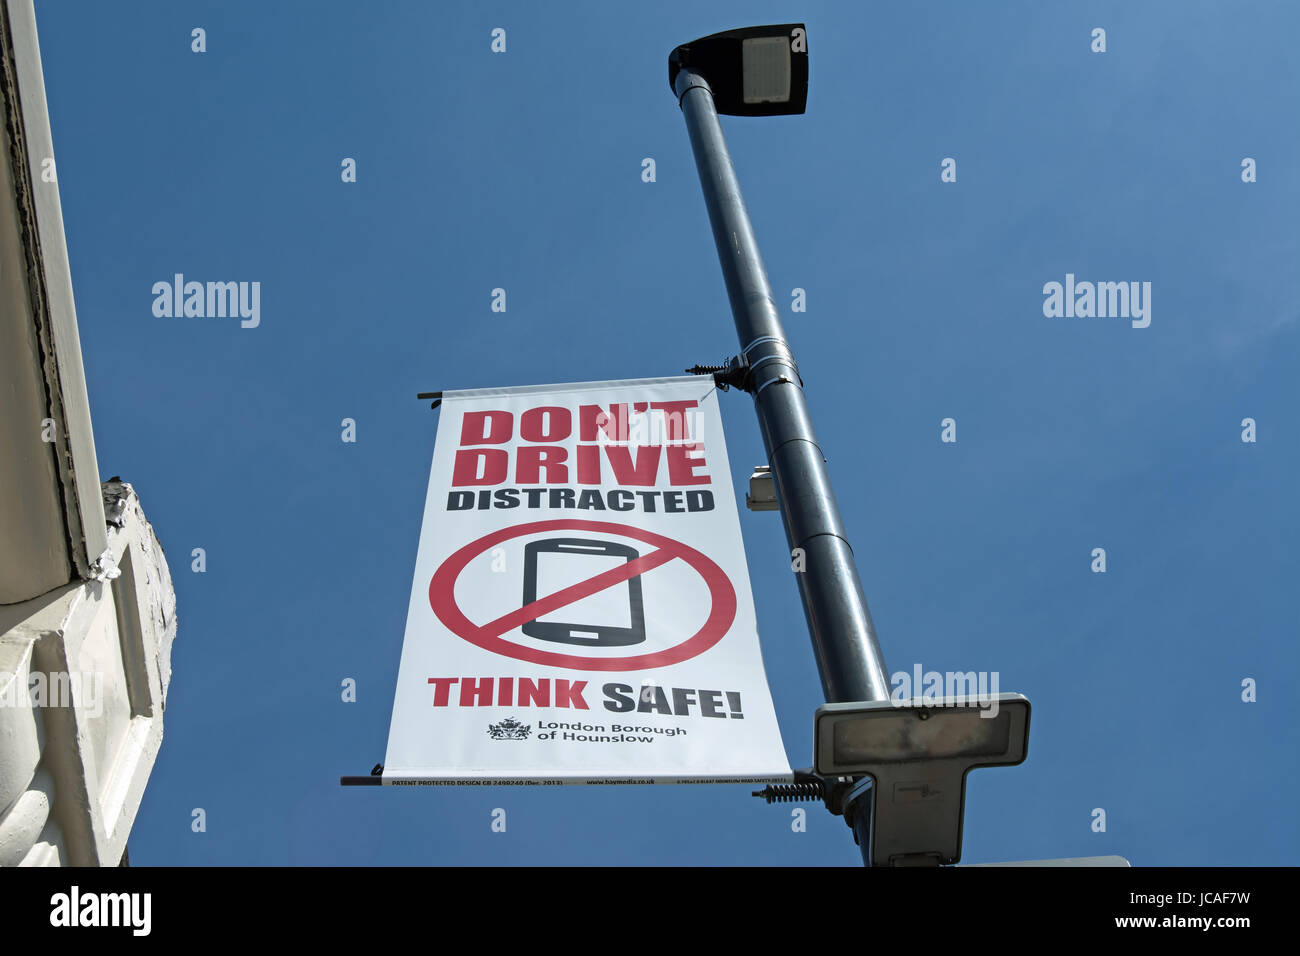 don't drive distracted think safe! hounslow council road safety banner advising drivers not use mobile phones while driving Stock Photo